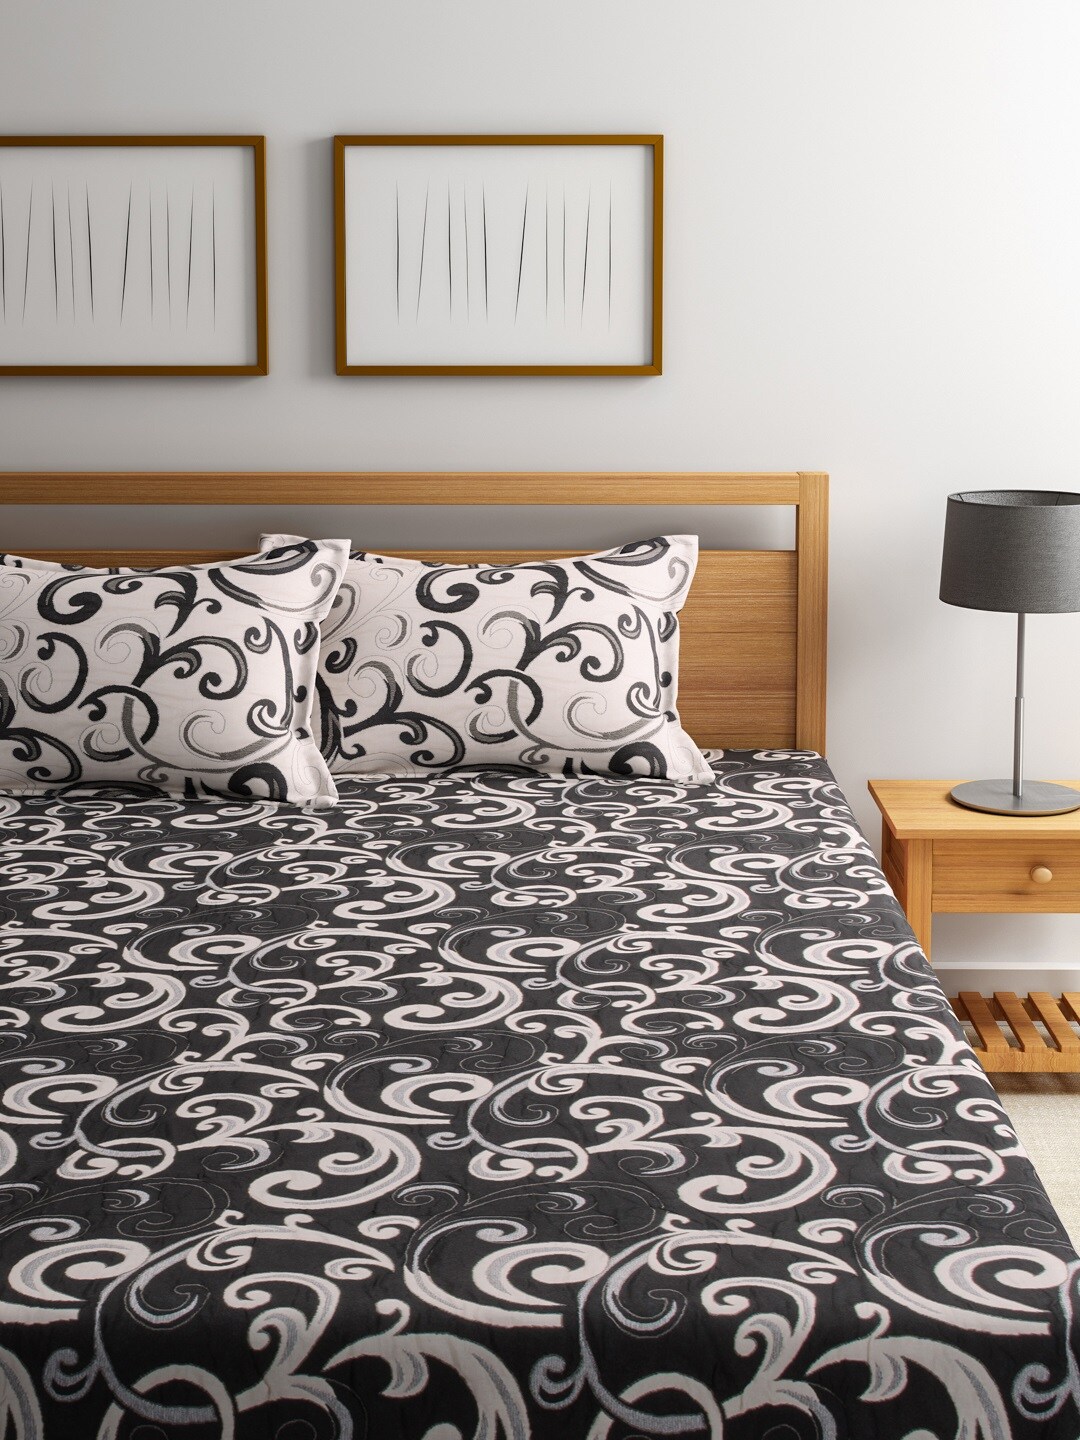 ROMEE Black Woven Design Polycotton Double Bed Cover with 2 Pillow Covers Price in India